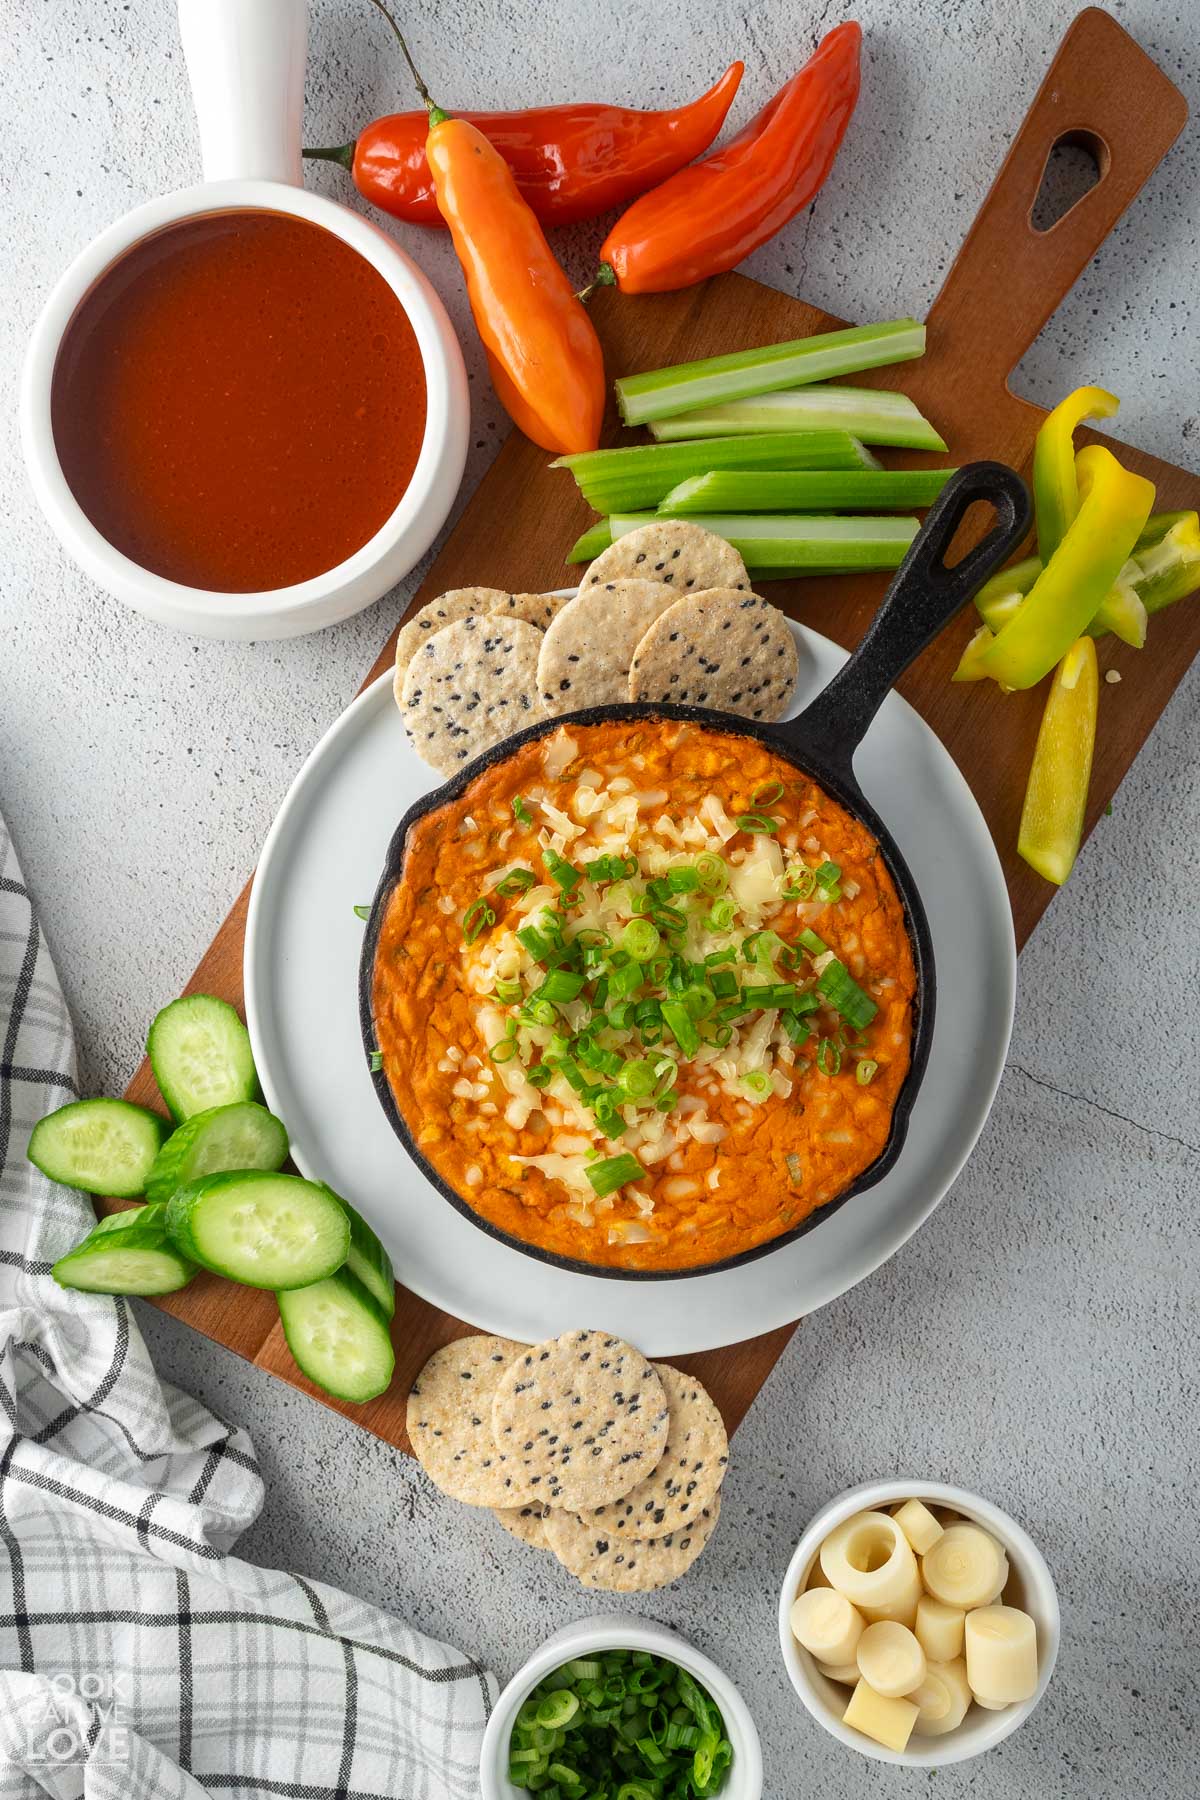 A bowl of vegan buffalo chicken dip on a plate with veggie sticks and crackers on the table.